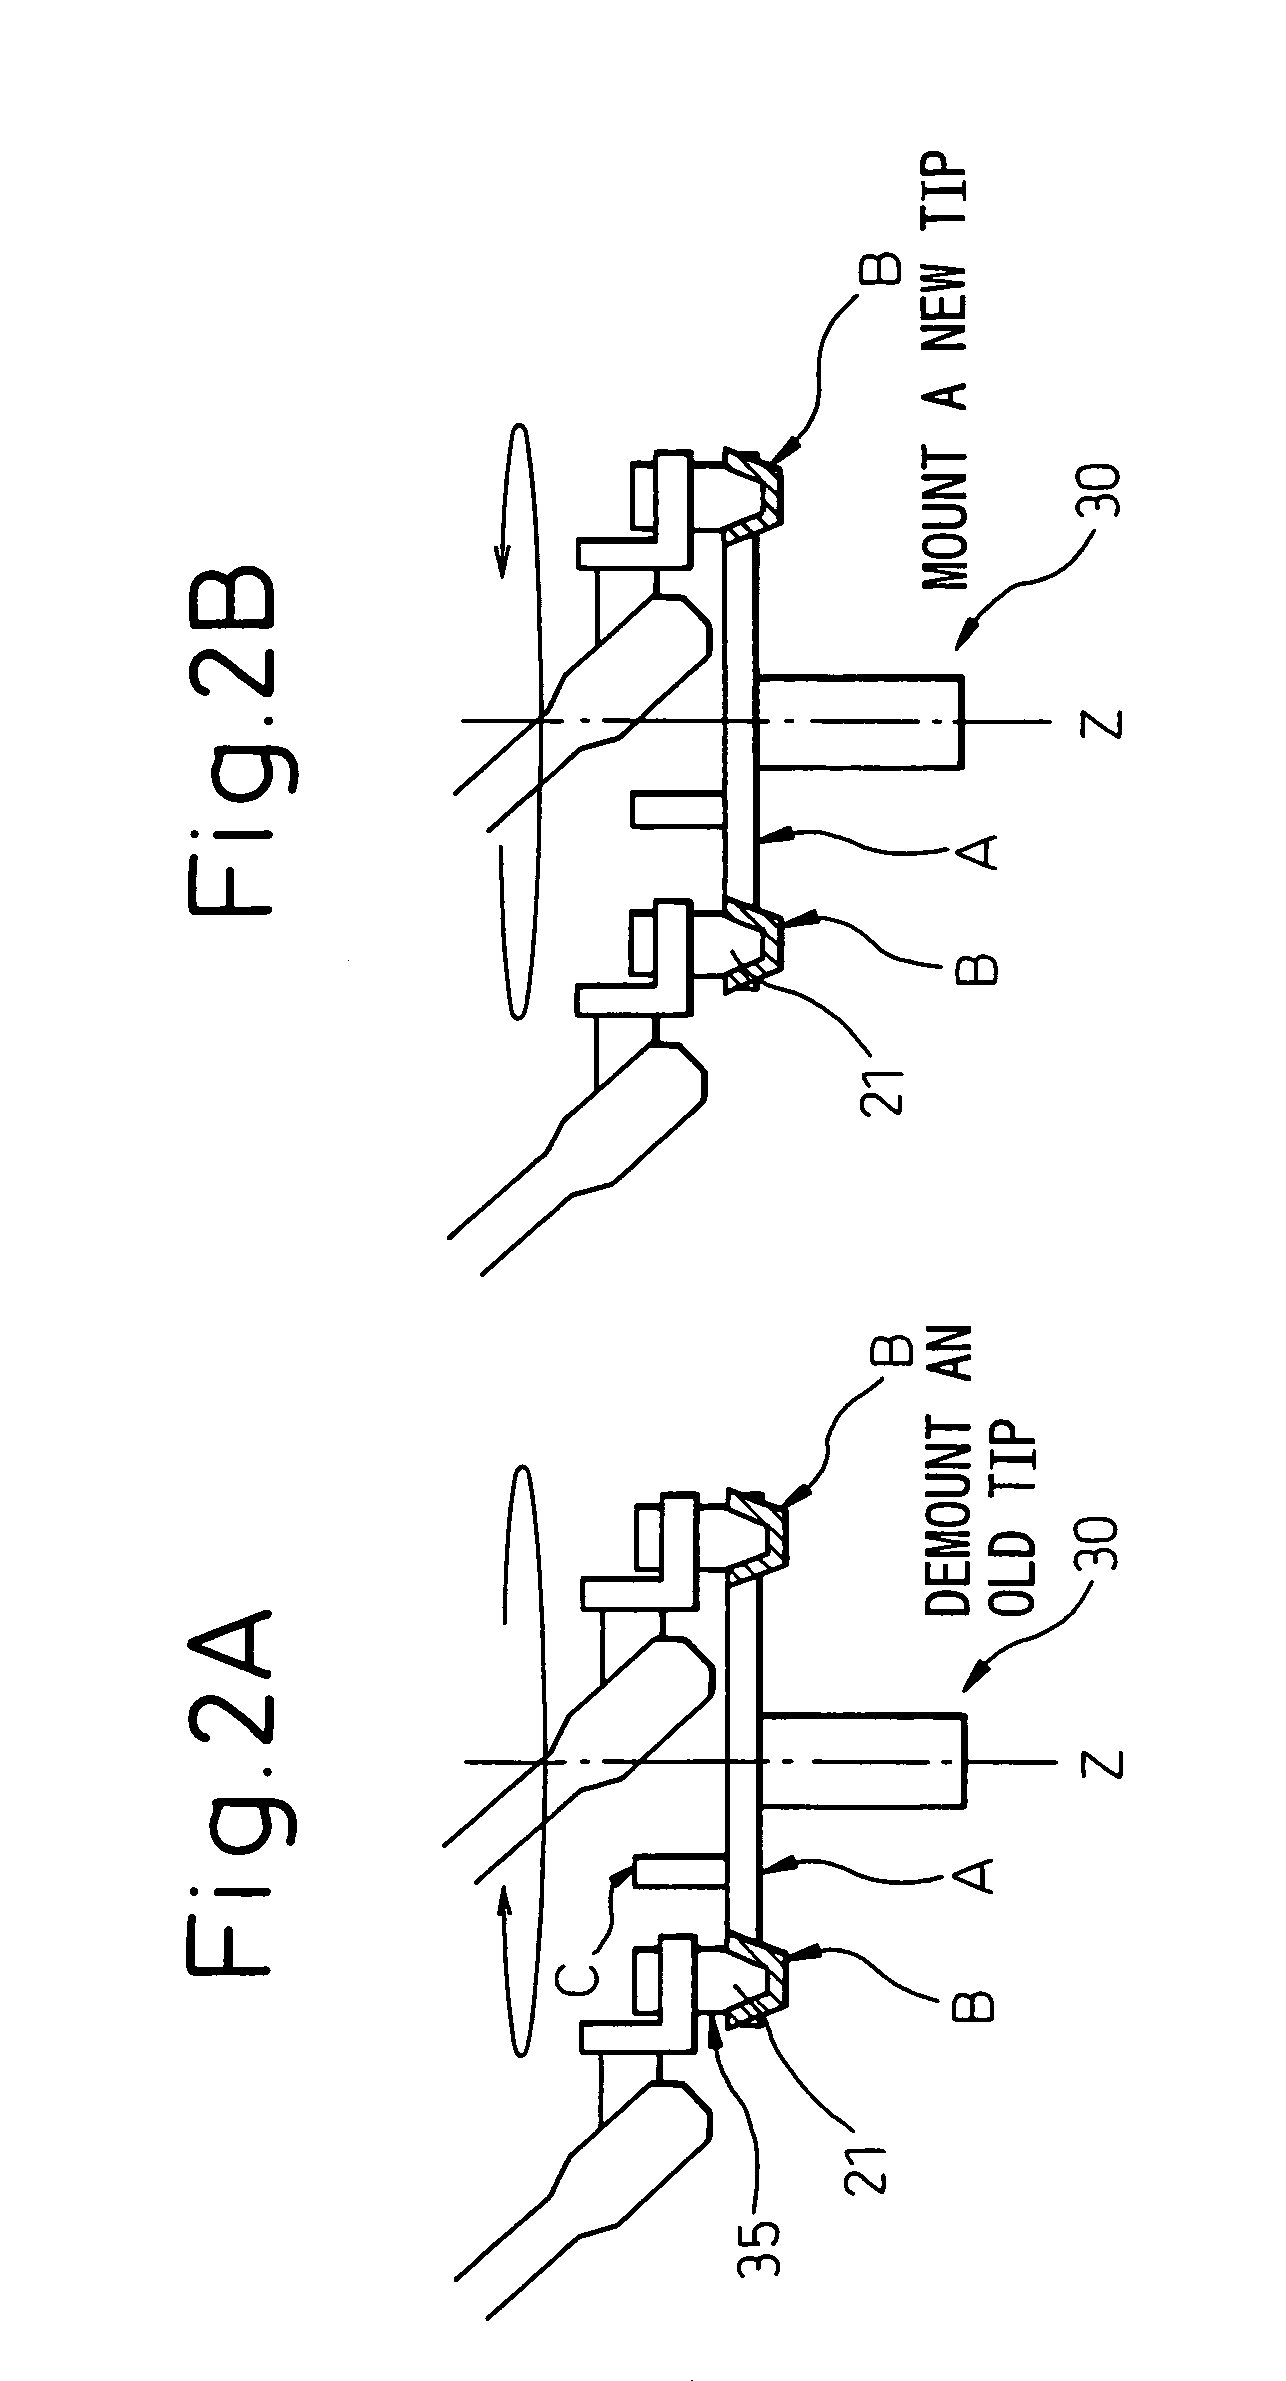 Apparatus for automatically changing a robot tool tip member